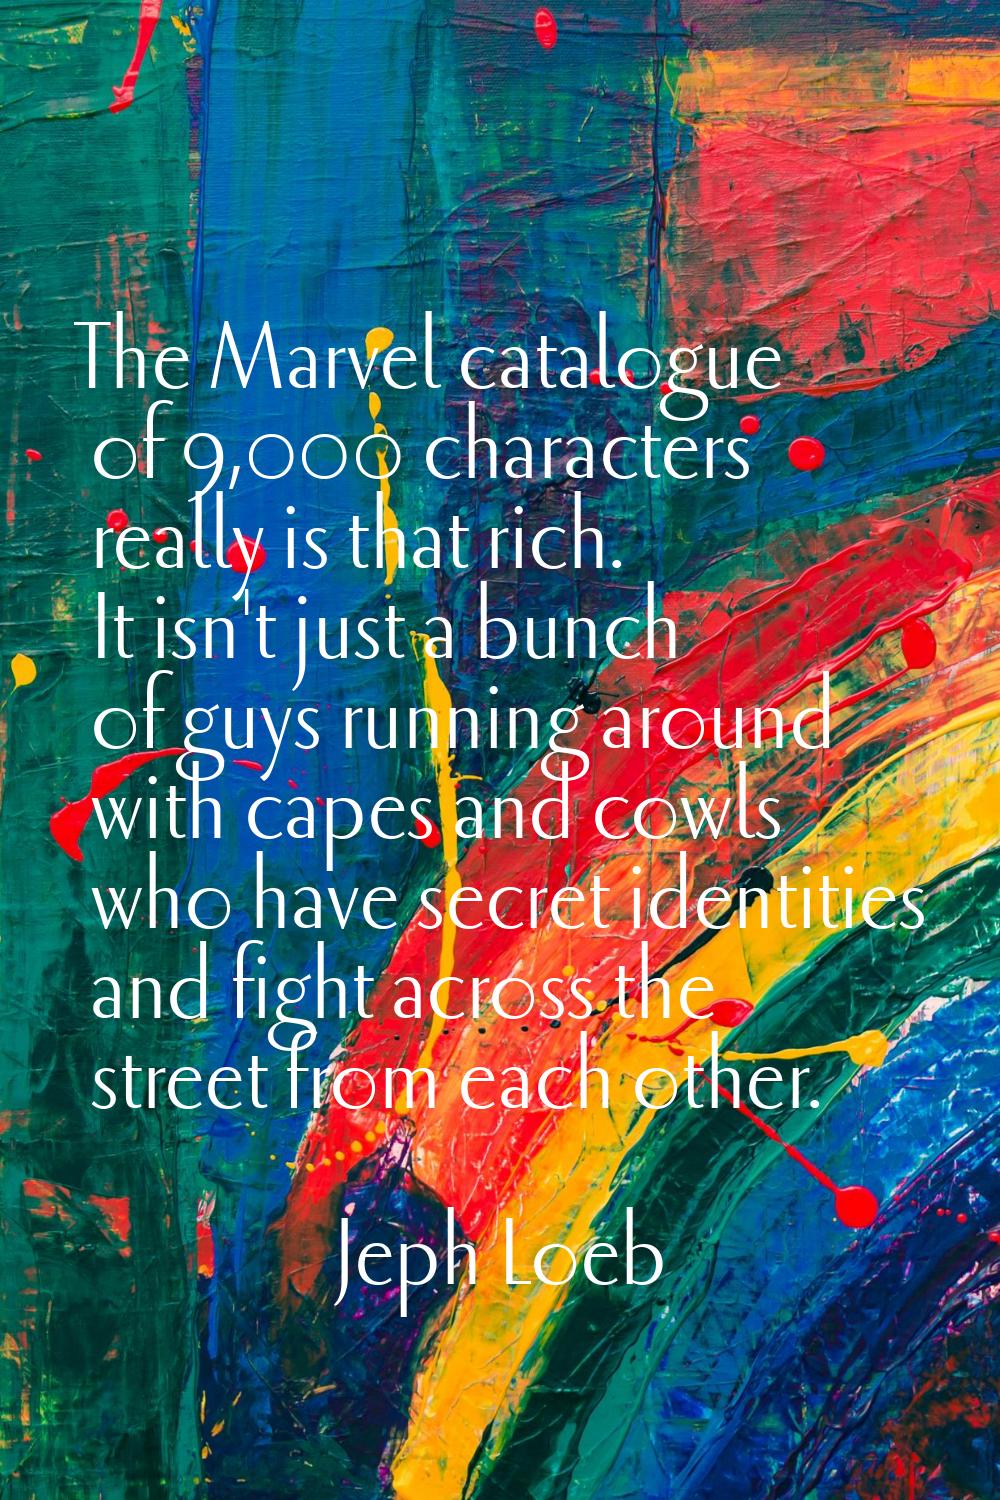 The Marvel catalogue of 9,000 characters really is that rich. It isn't just a bunch of guys running